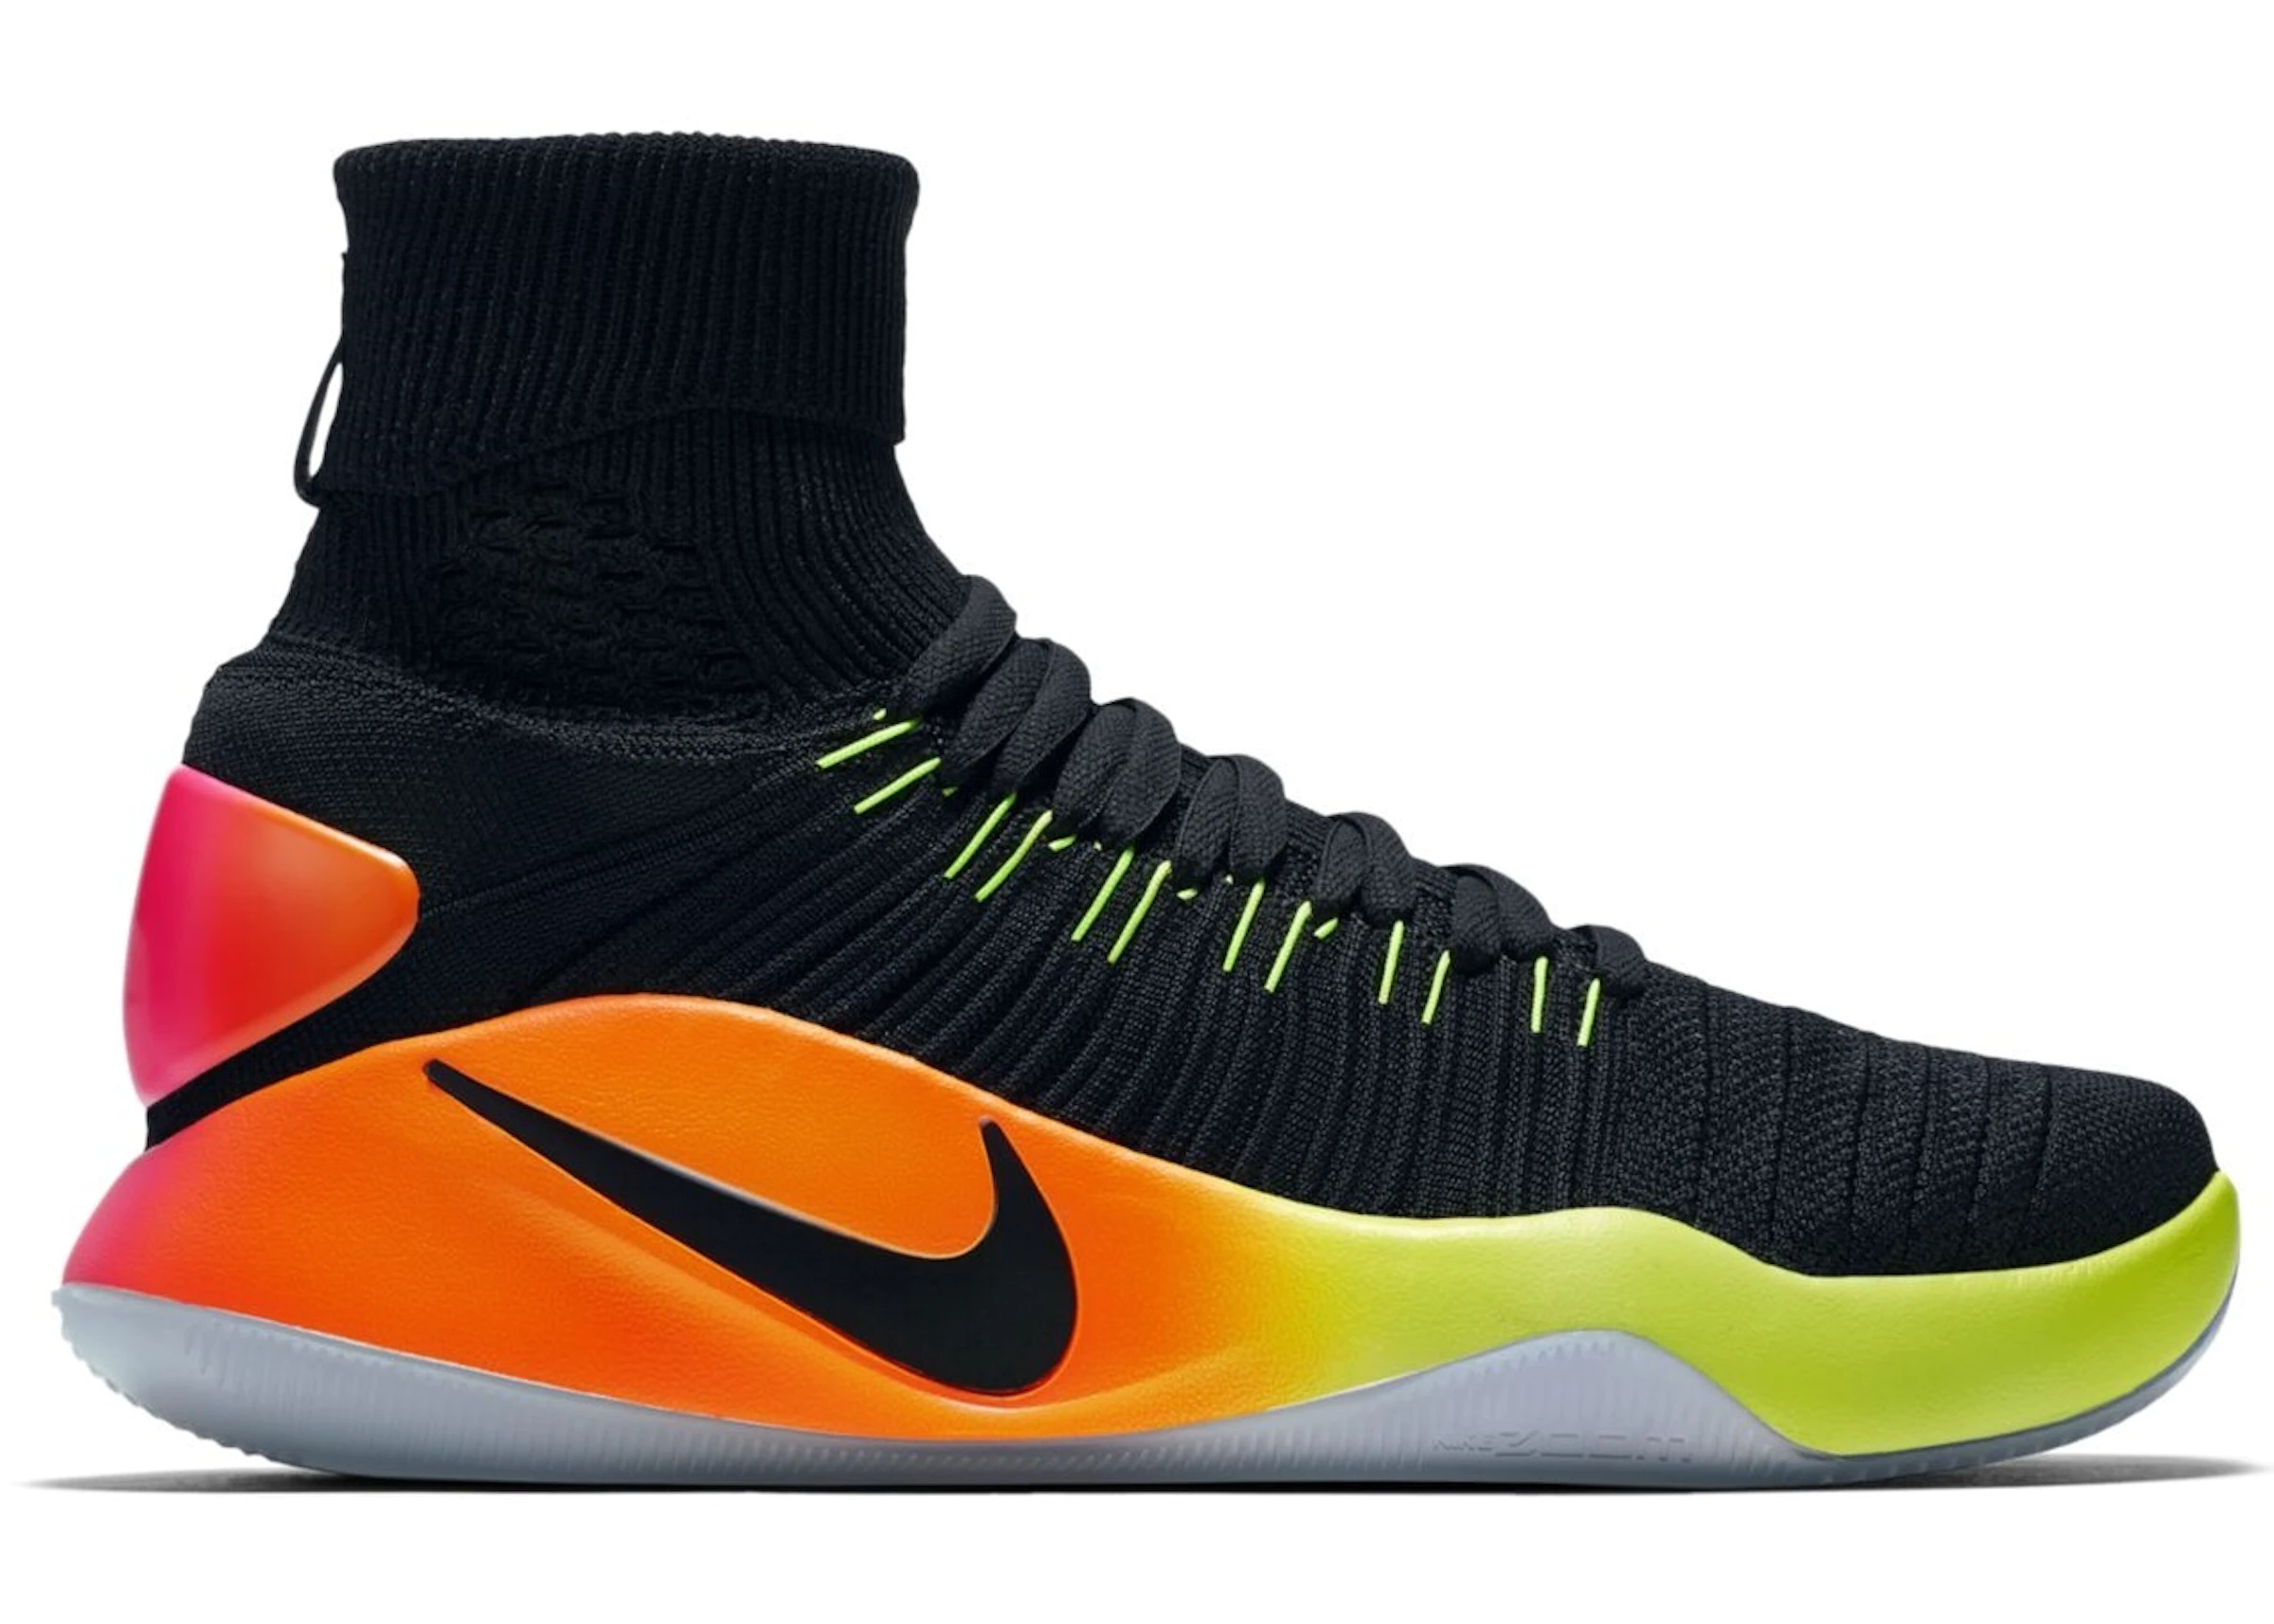 Buy Nike hyper dunk shoes Basketball Hyperdunk Shoes & New Sneakers - StockX